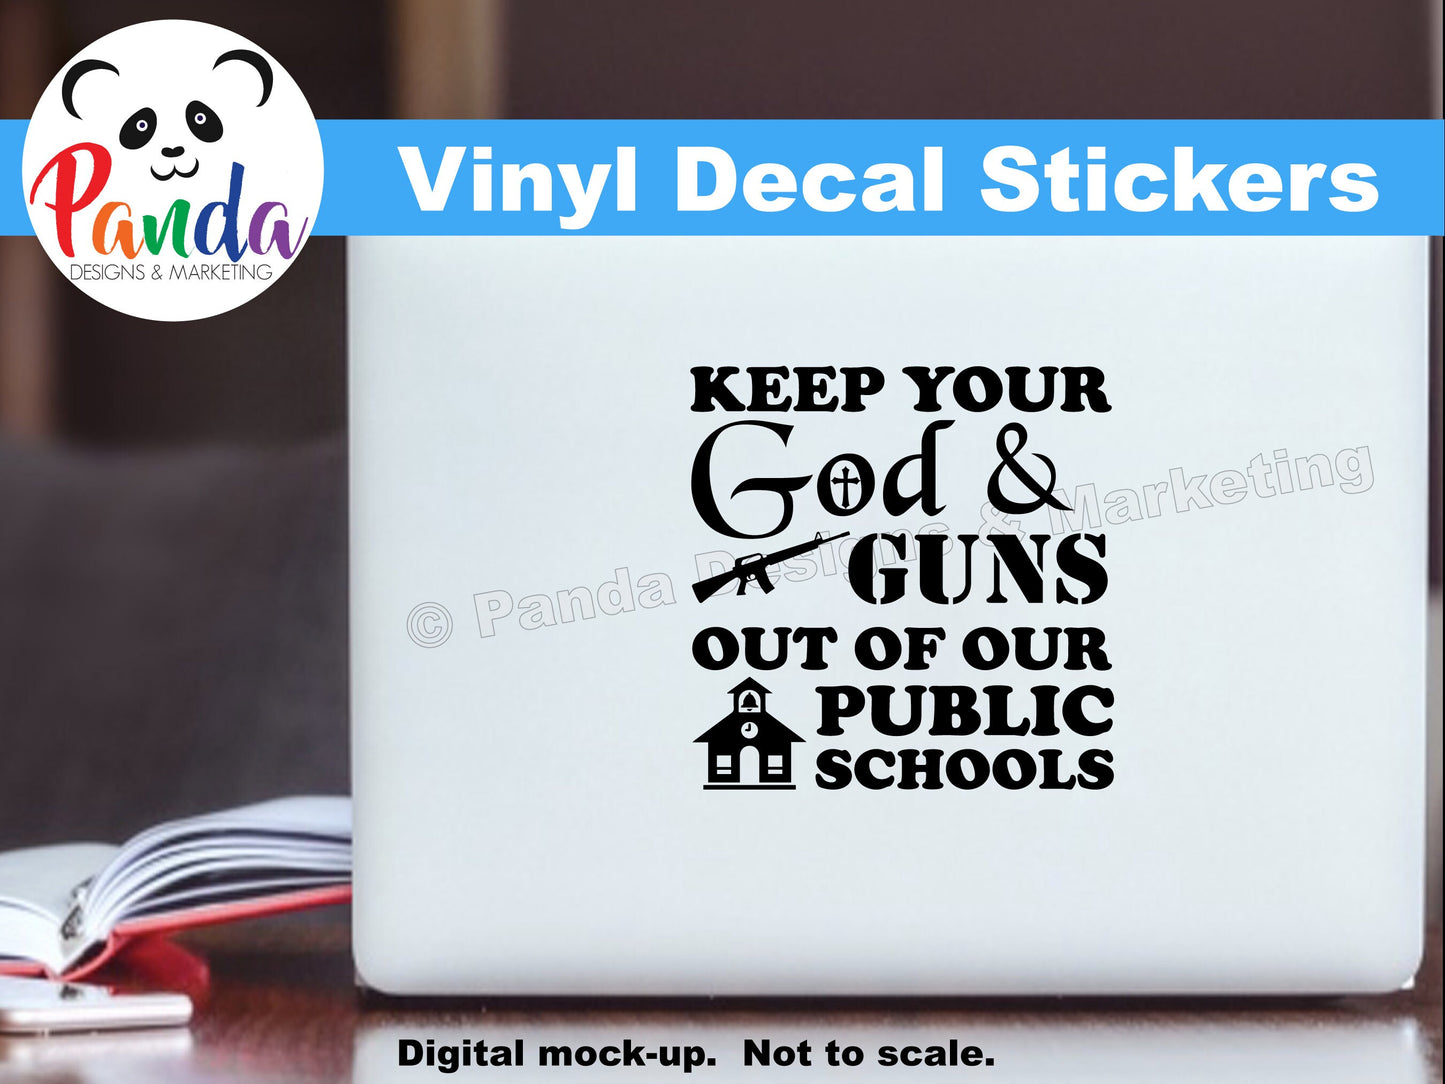 Keep Your God and Guns Out of Our Public Schools vinyl decal stickers for car, laptop, waterbottles, hydroflask, and more.